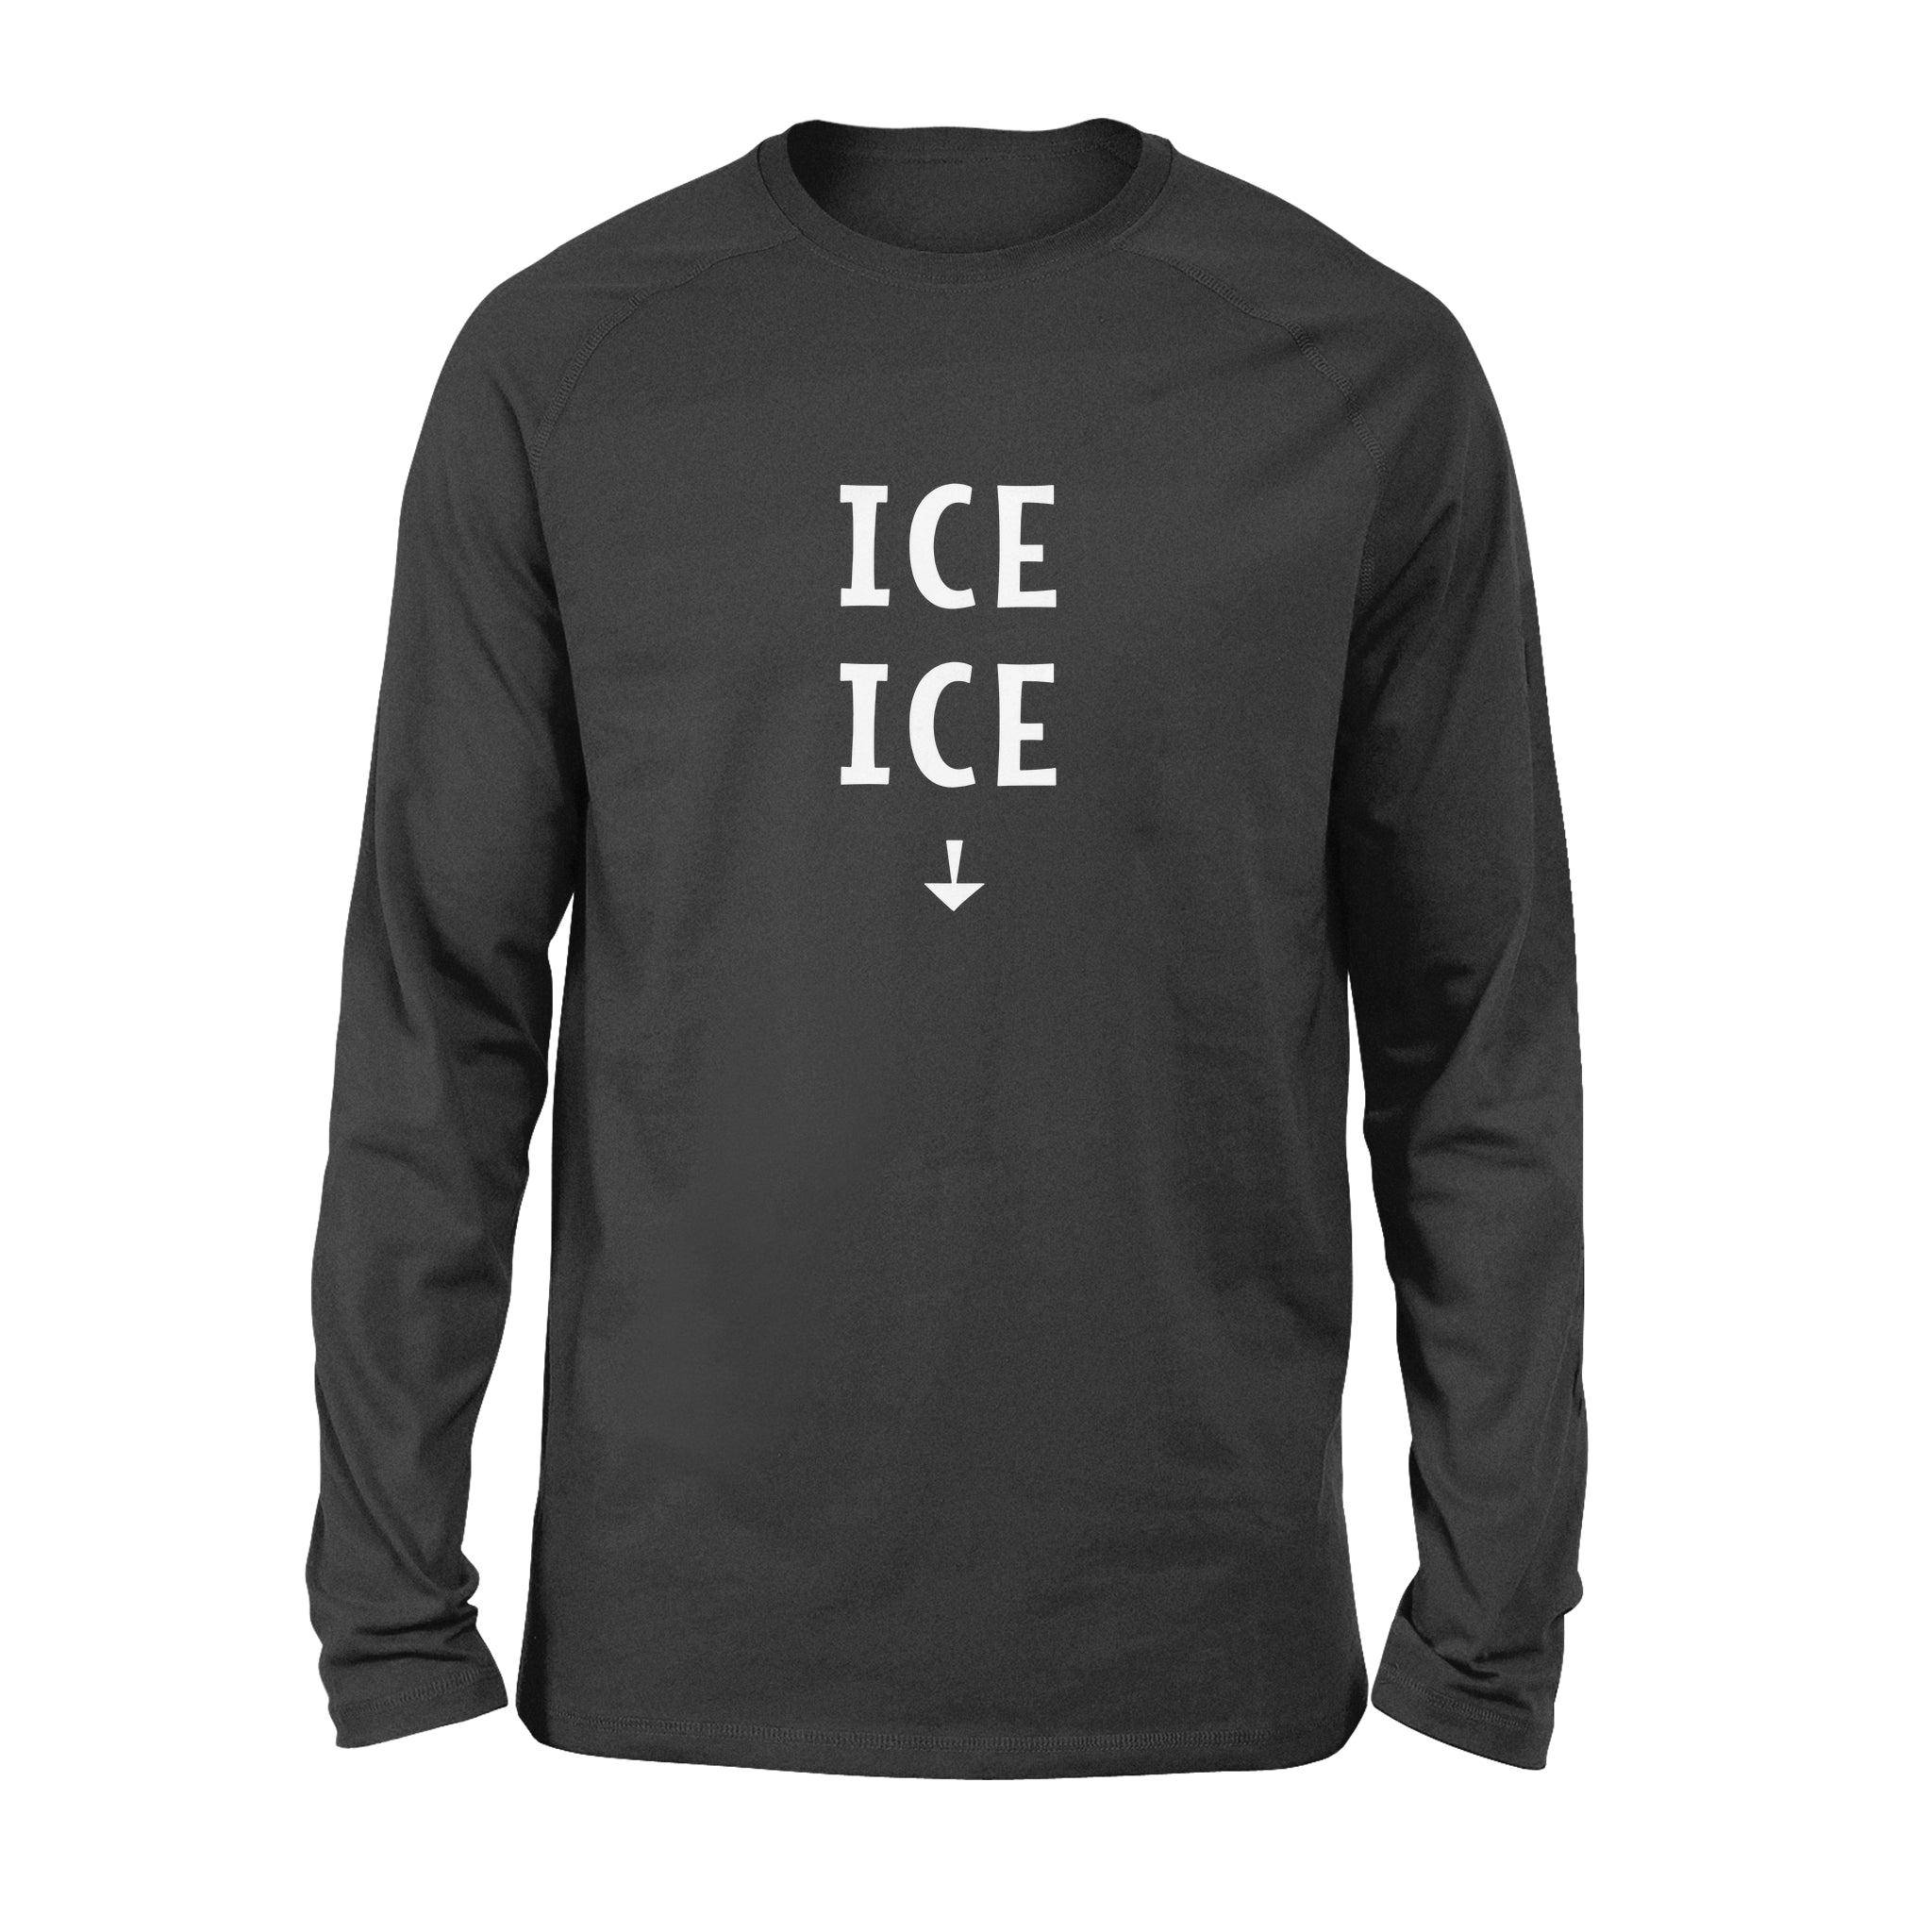 Ice Ice Baby Pregnancy Announcement - Standard Long Sleeve